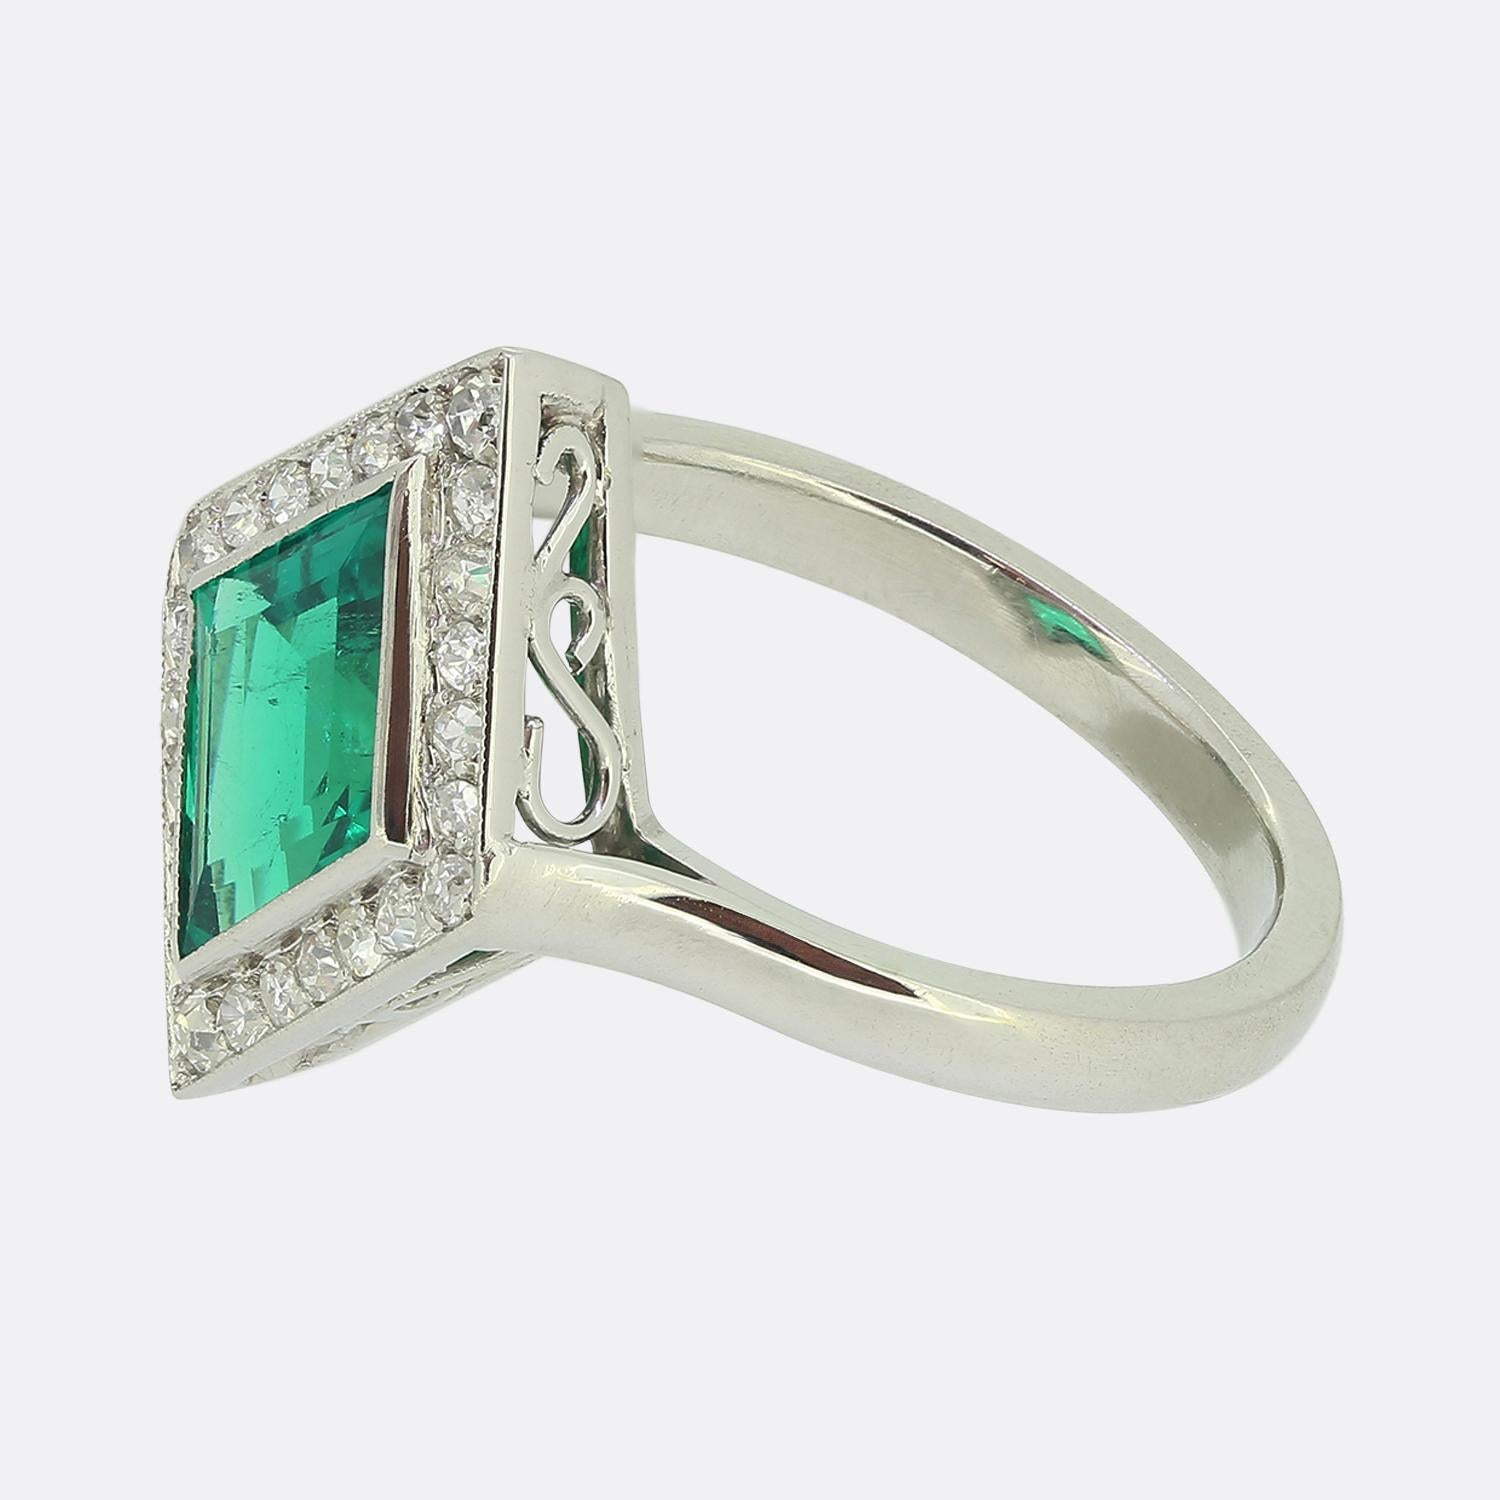 Here we have a marvellous cluster ring taken from a time when the Art Deco style was revolutionising the world of design. A single lozenge shaped emerald of Colombian origin sits slightly risen at the centre of the face showcasing a rich vivid green